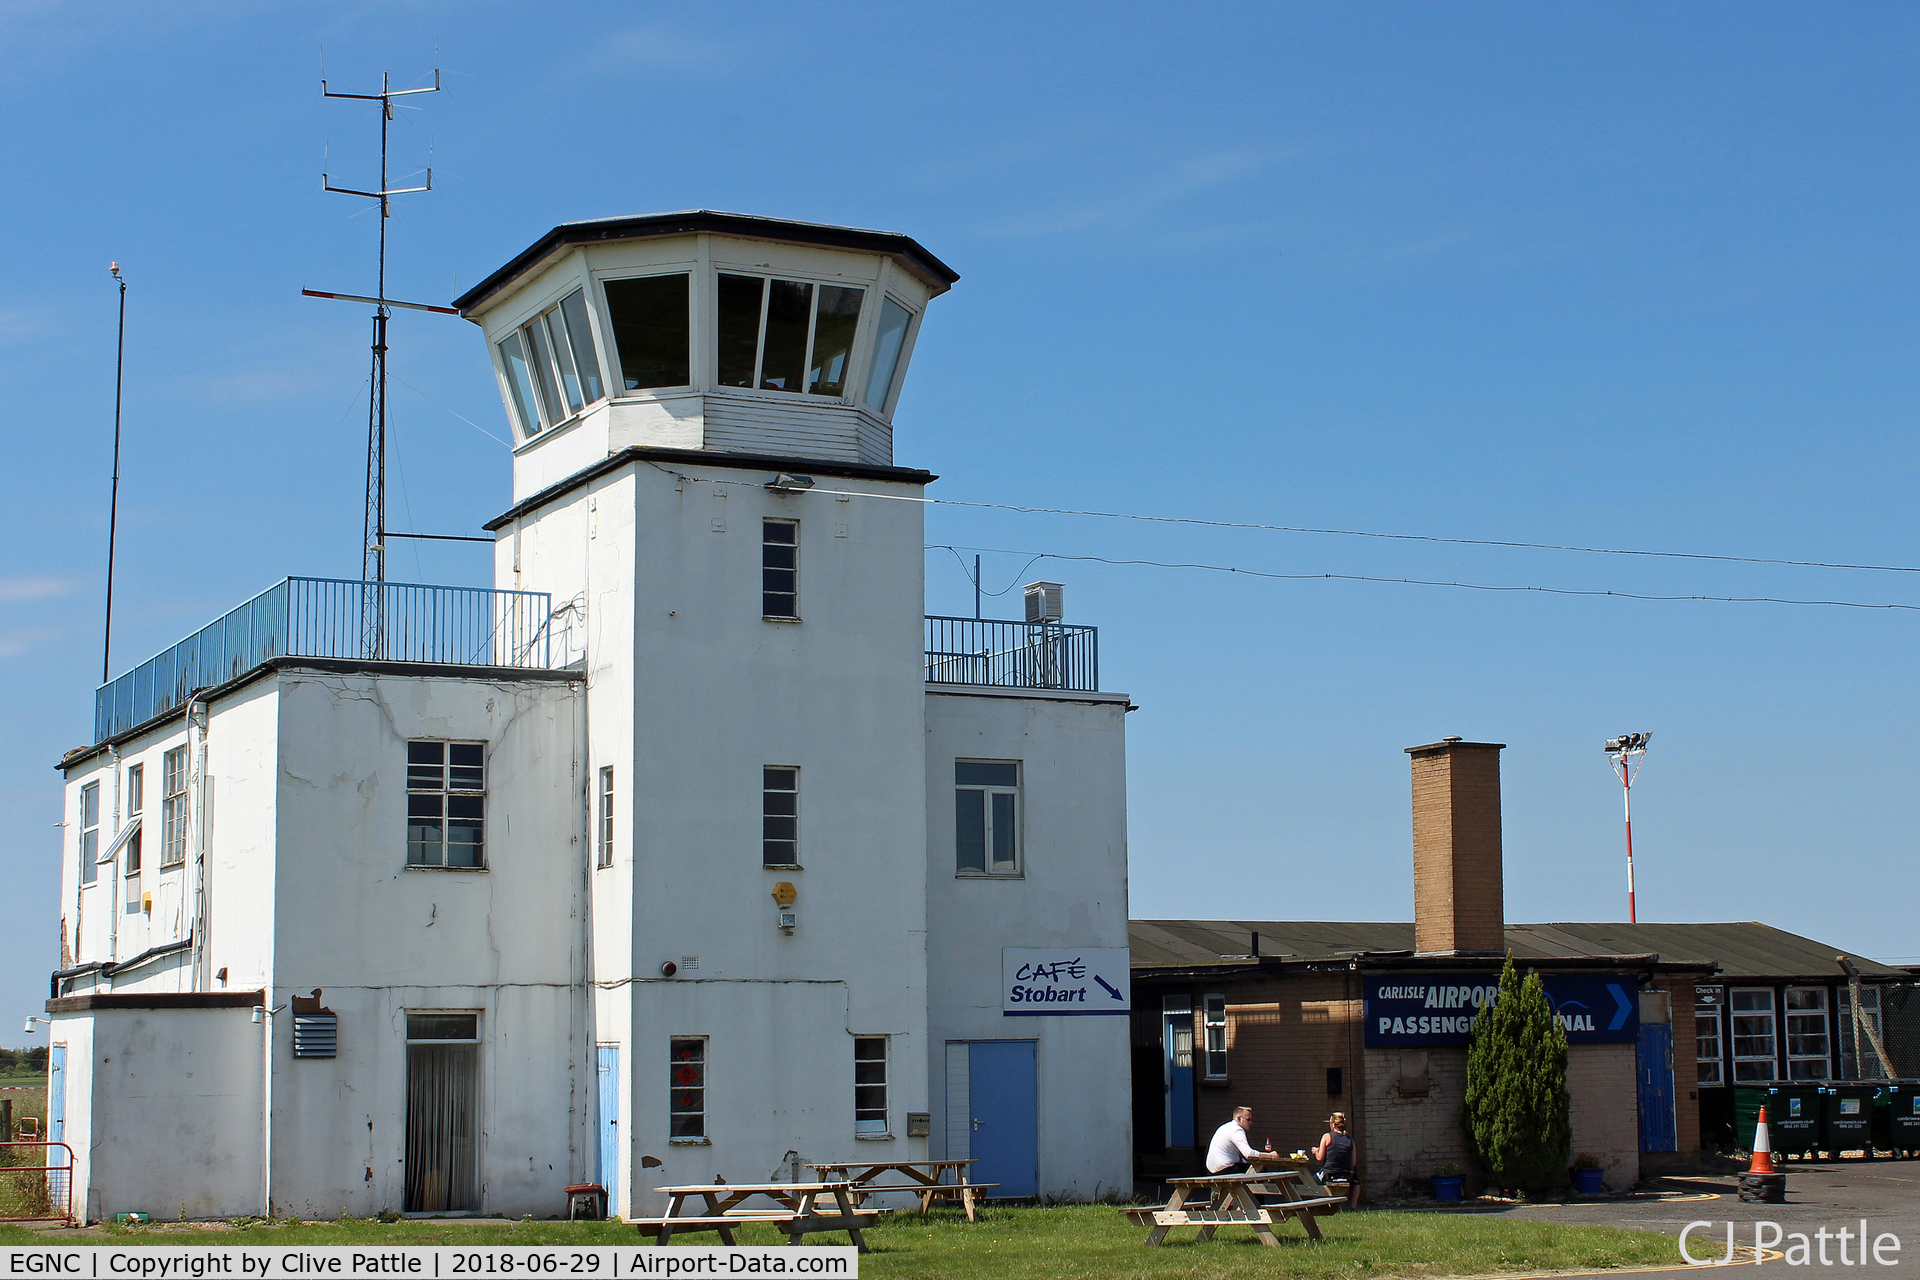 Carlisle Airport, Carlisle, England United Kingdom (EGNC) - The WWII Tower at Carlisle. Still in use along with the 'Cafe Stobart' within. Tower and cafe to become redundant in September 2018 when the new airport buildings open.